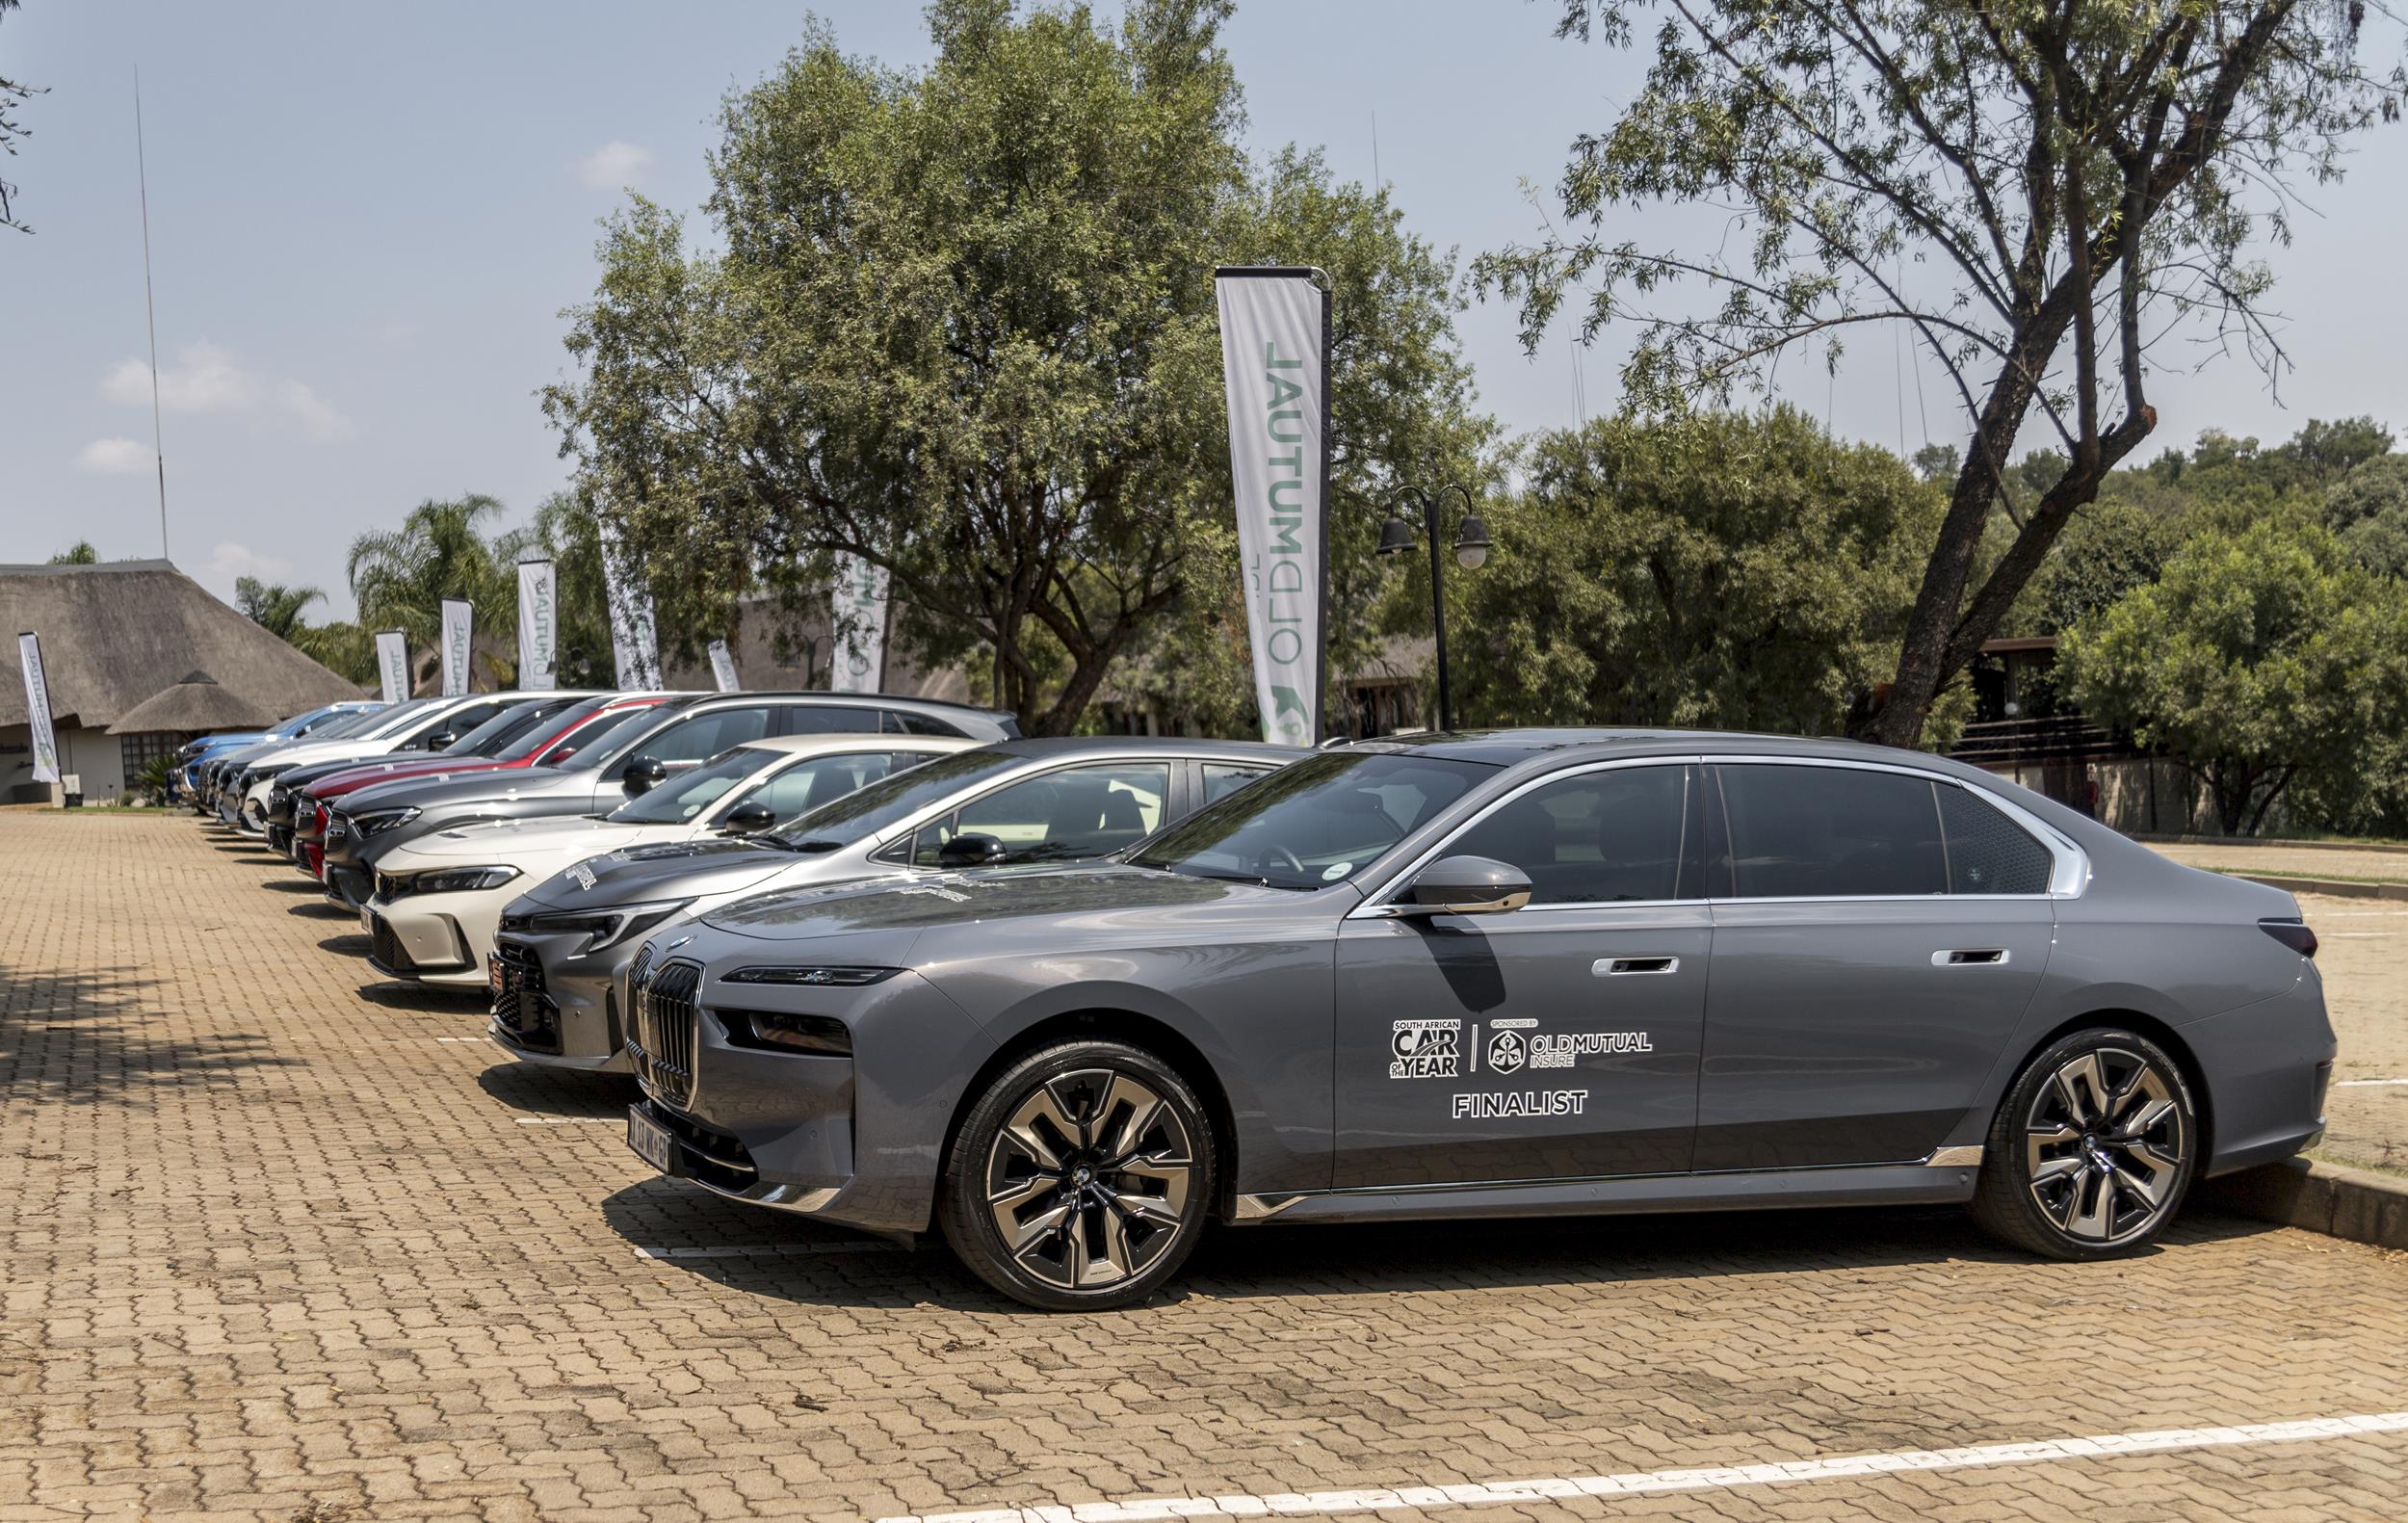 2024 SA Car of the Year Finalists Show Mettle Over Rigorous Test Day